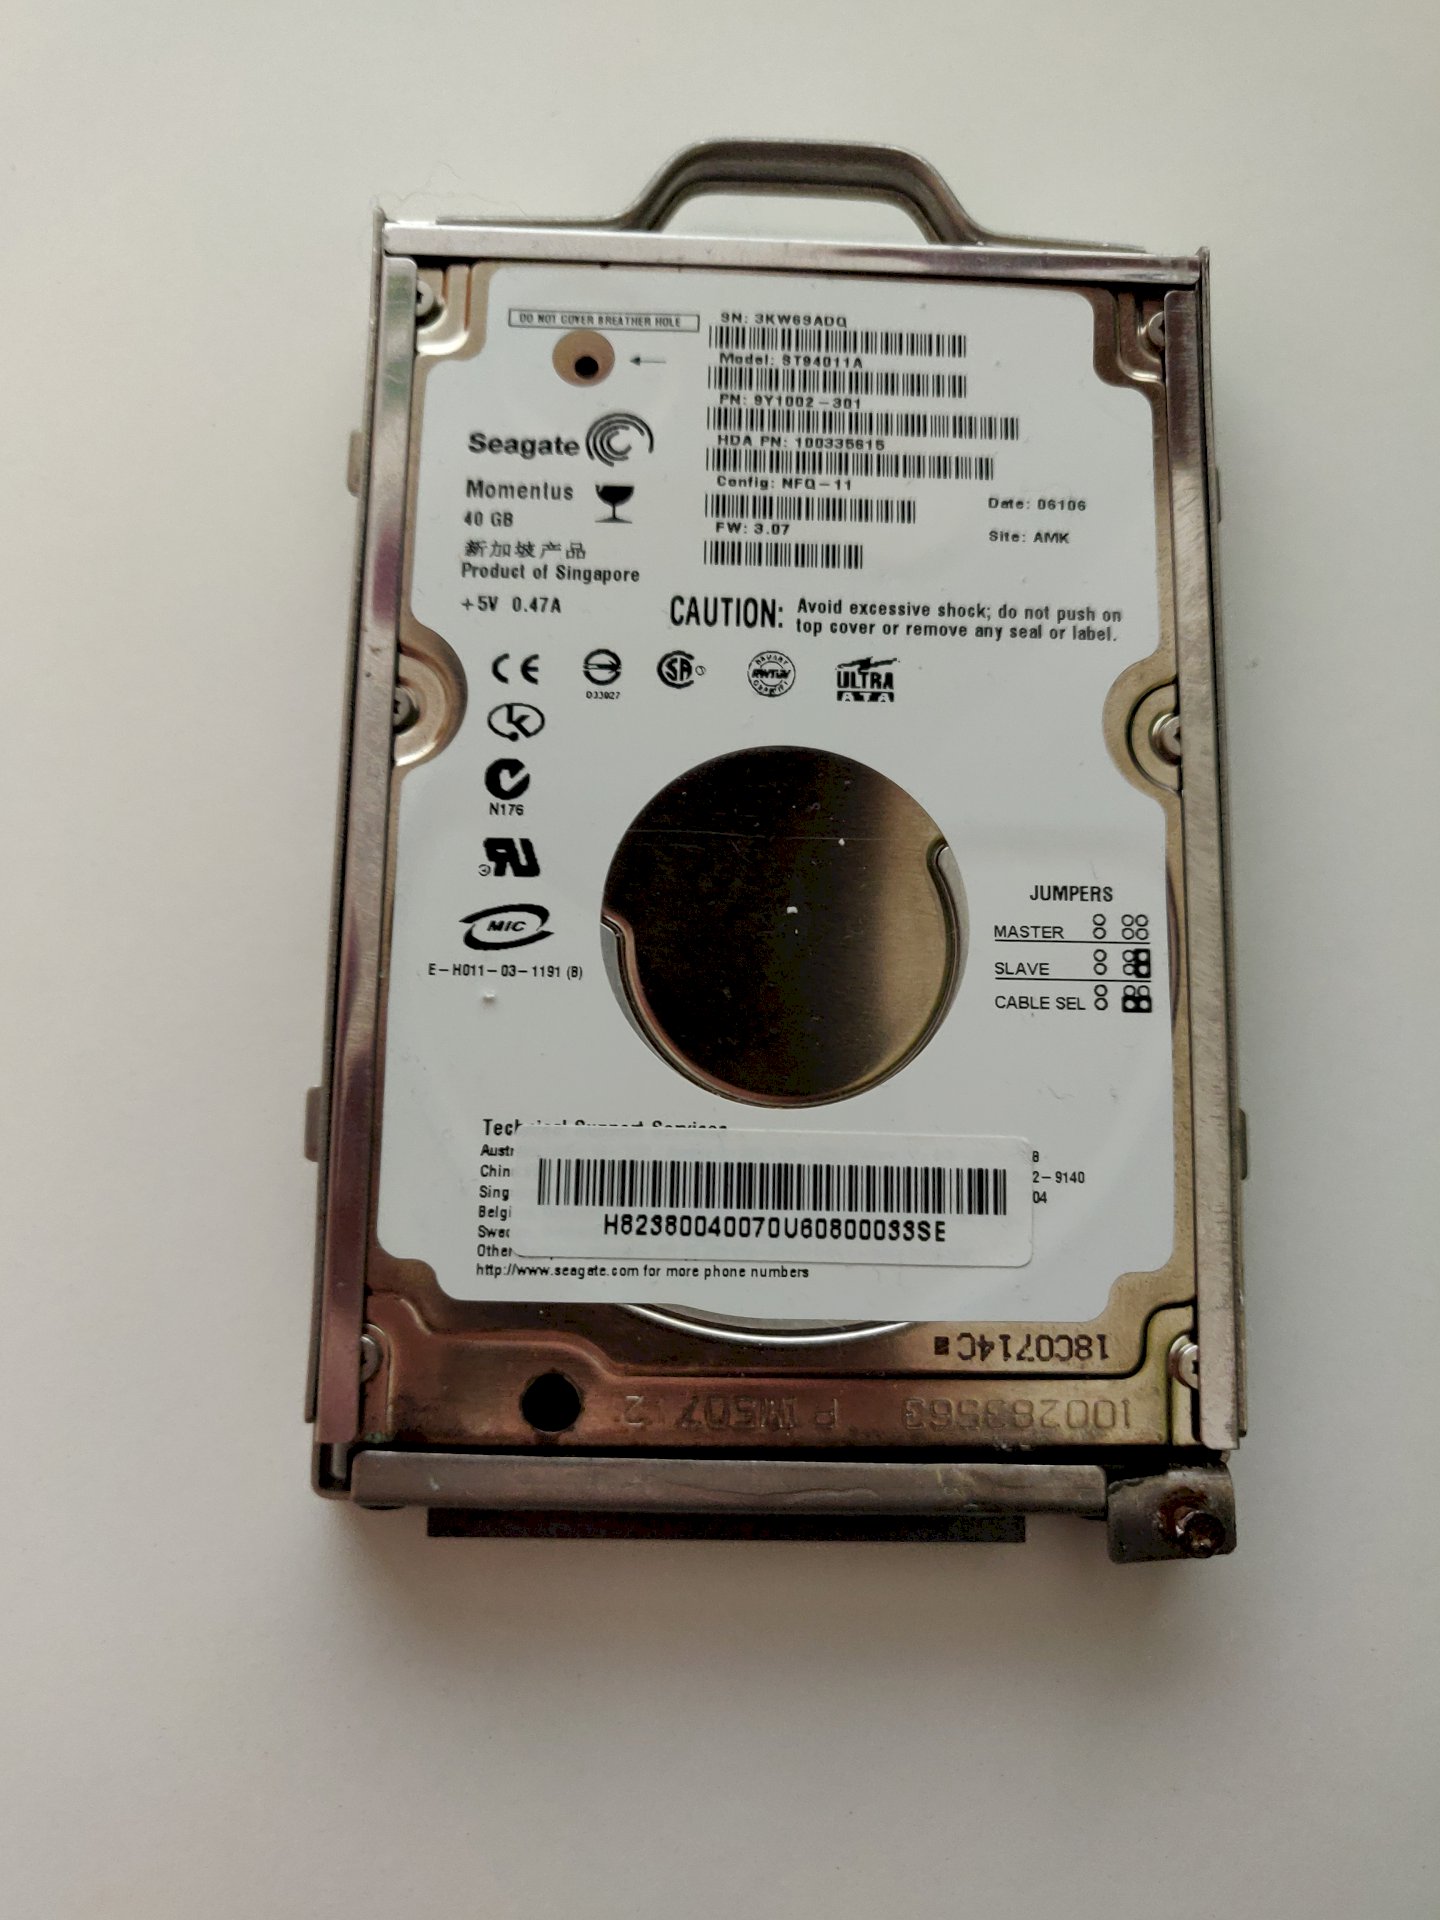 Is there an adapter for buying this old laptop hard drive